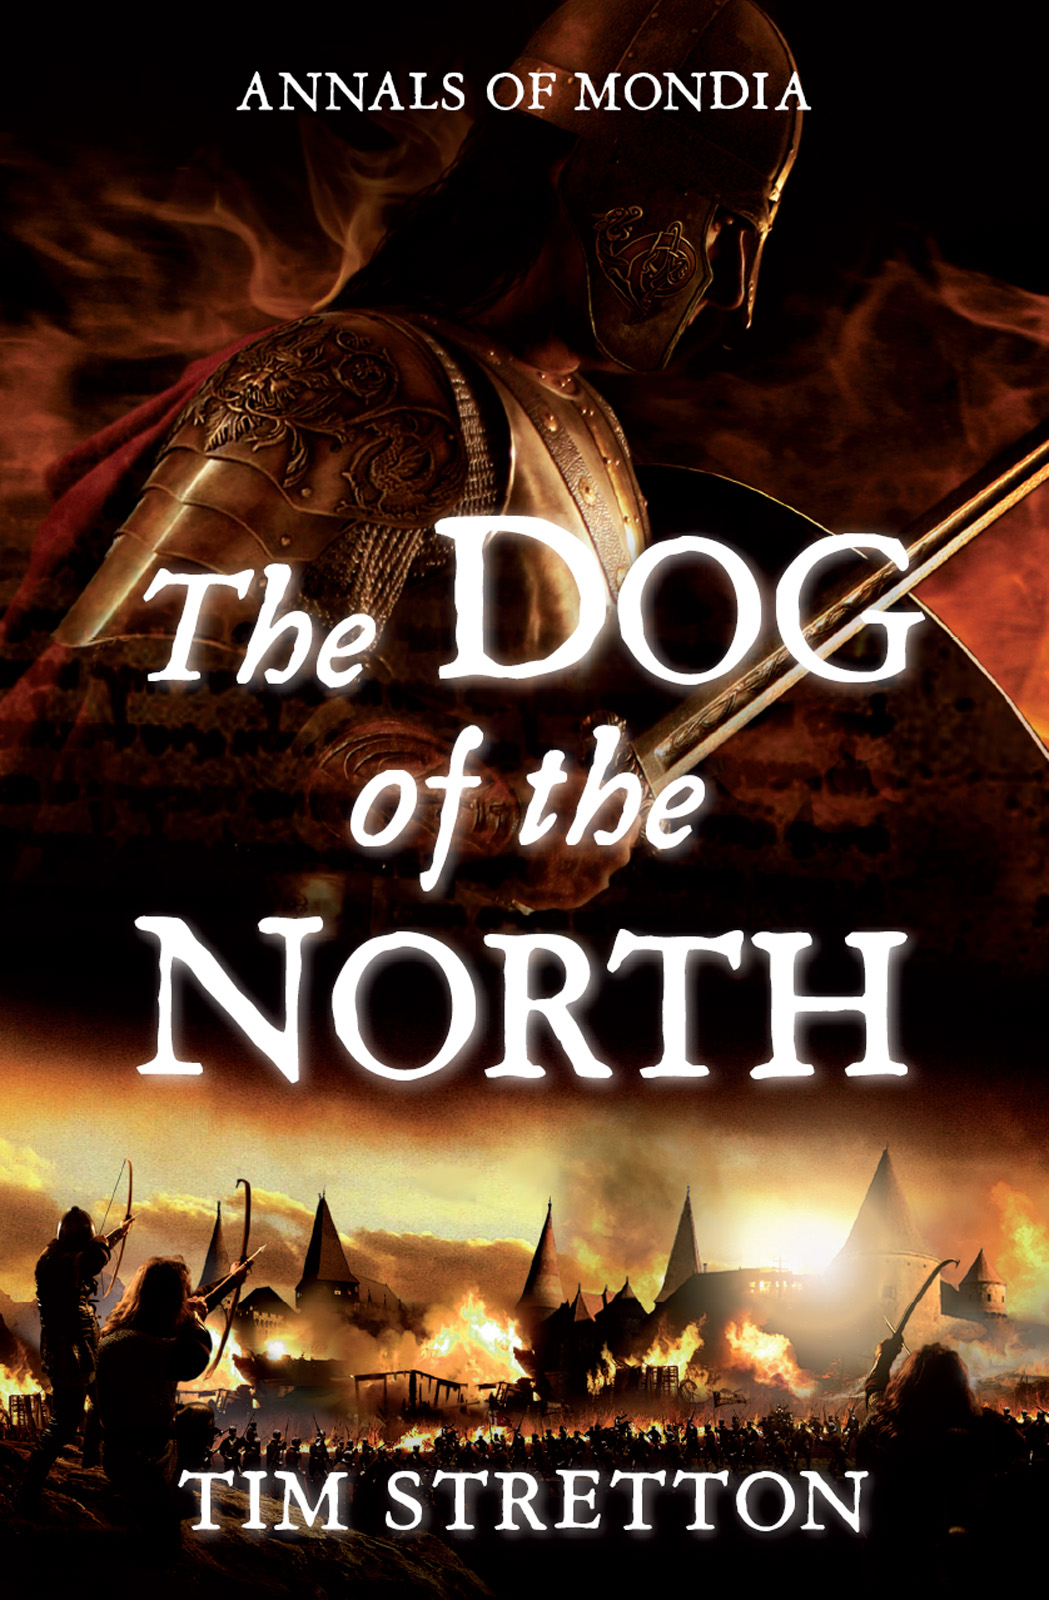 The Dog of the North